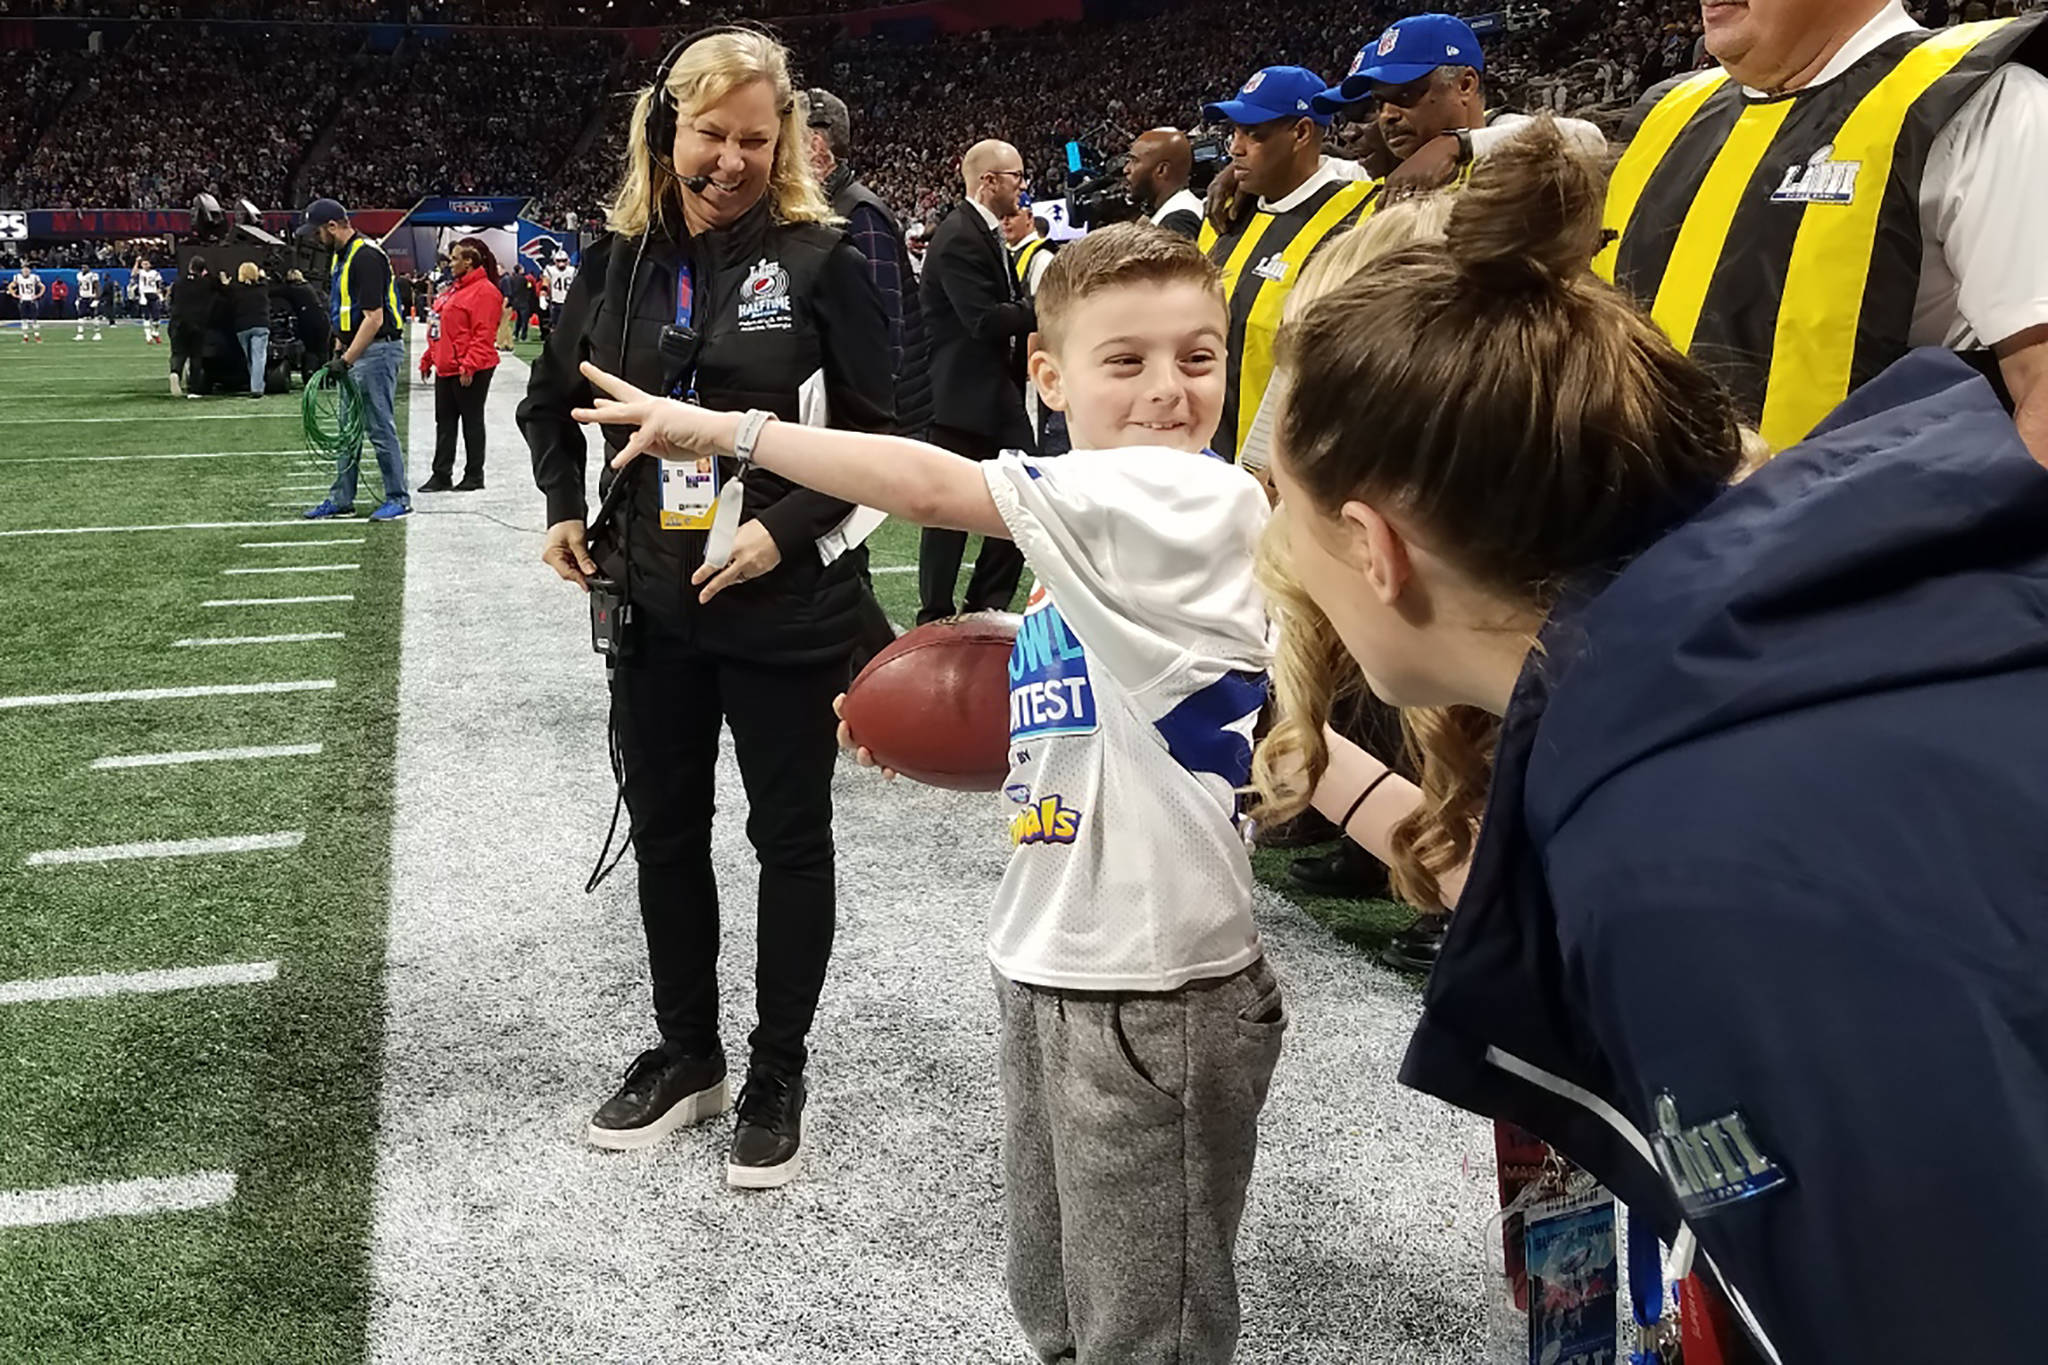 Camdyn Clancy, 8, prepares to deliver to the game ball to the Super Bowl LIII officiating crew at the Mercedes-Benz Stadium in Atlanta on Sunday, Feb. 3, 2019. The Juneau third-grader and Seattle Seahawks superfan won an all-expense paid trip to cover the big game as the grand prize winner of the NFL PLAY 60 Super Kid contest. (Courtesy Photo | Hannah Clancy)